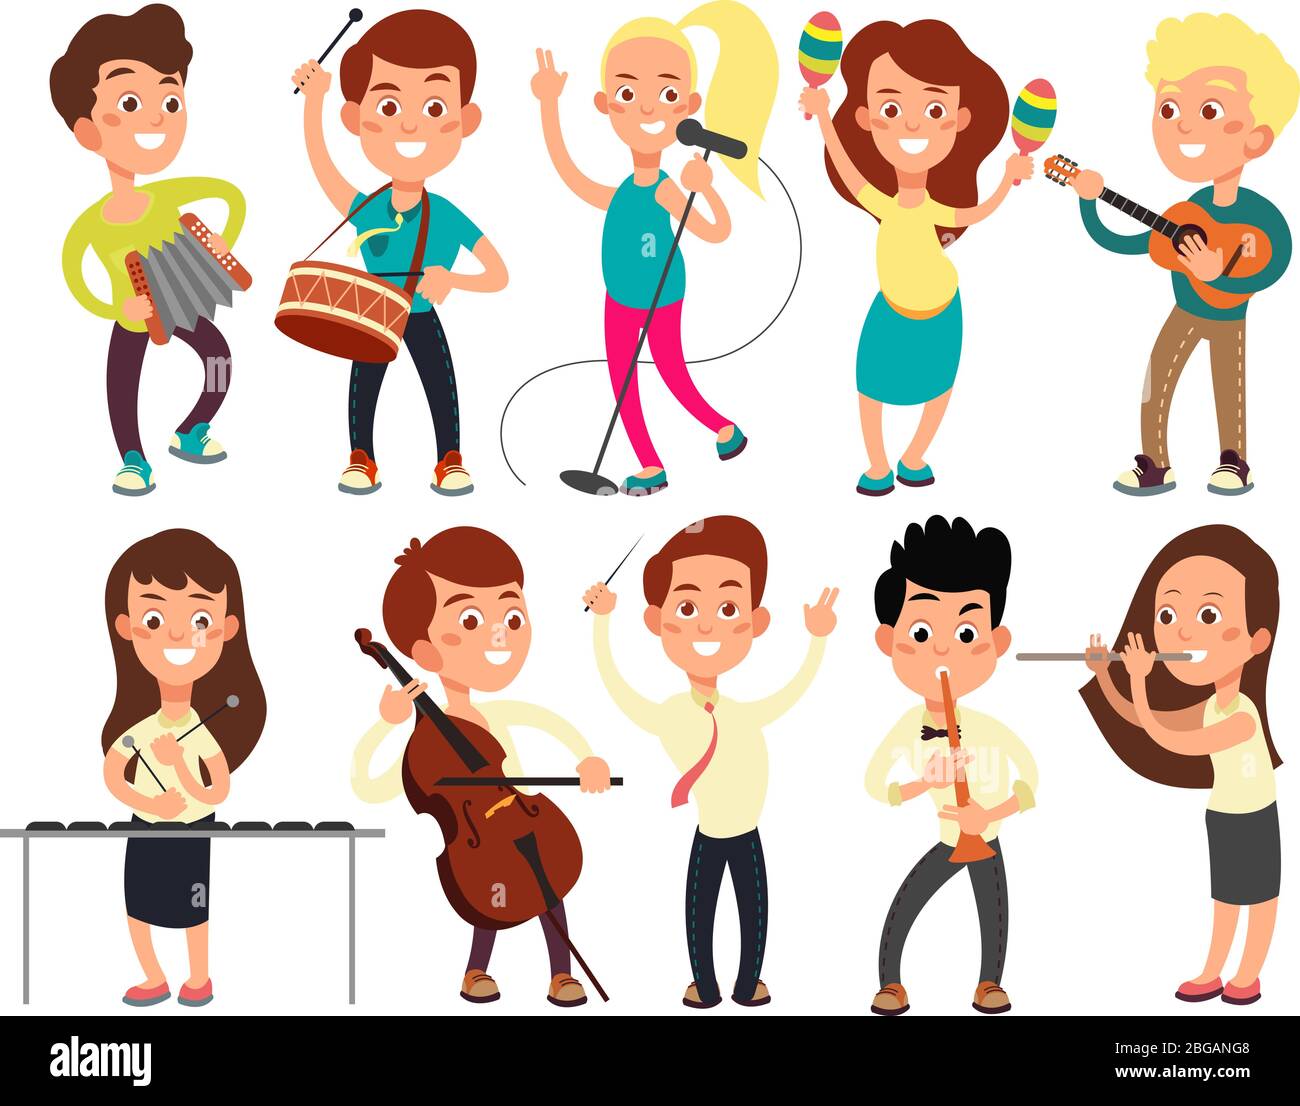 Schoolkids playing music on stage. Children musicians performing music show. Musical guitar and musician, playing and performance concert. Vector illustration Stock Vector